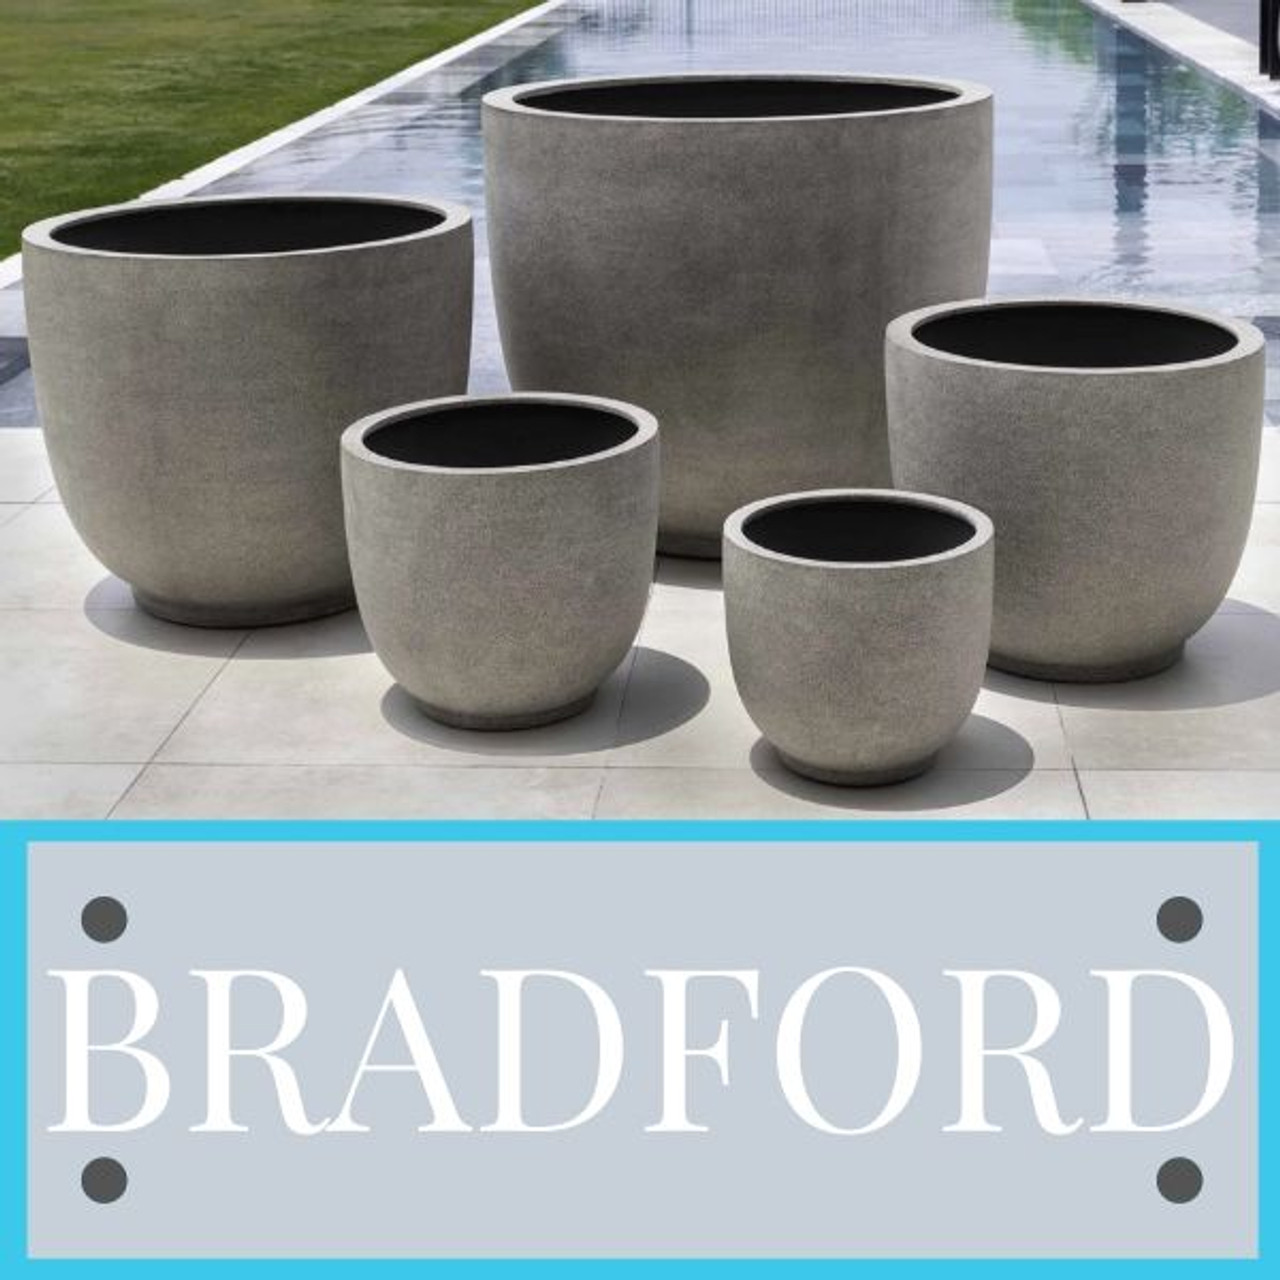 https://cdn11.bigcommerce.com/s-mh3d413nxf/images/stencil/1280x1280/products/420/2732/The_Bradford_Collection_from_Campania_Planters__08477.1577066114.jpg?c=2